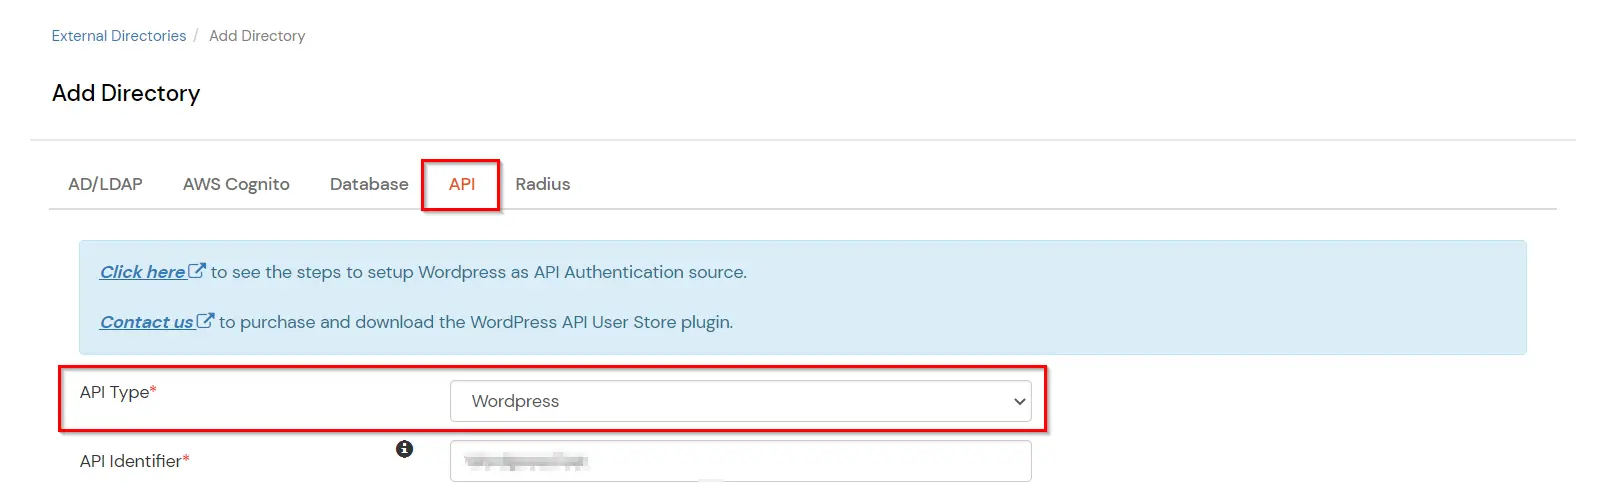 Switch to API configuration tab and select Wordpress